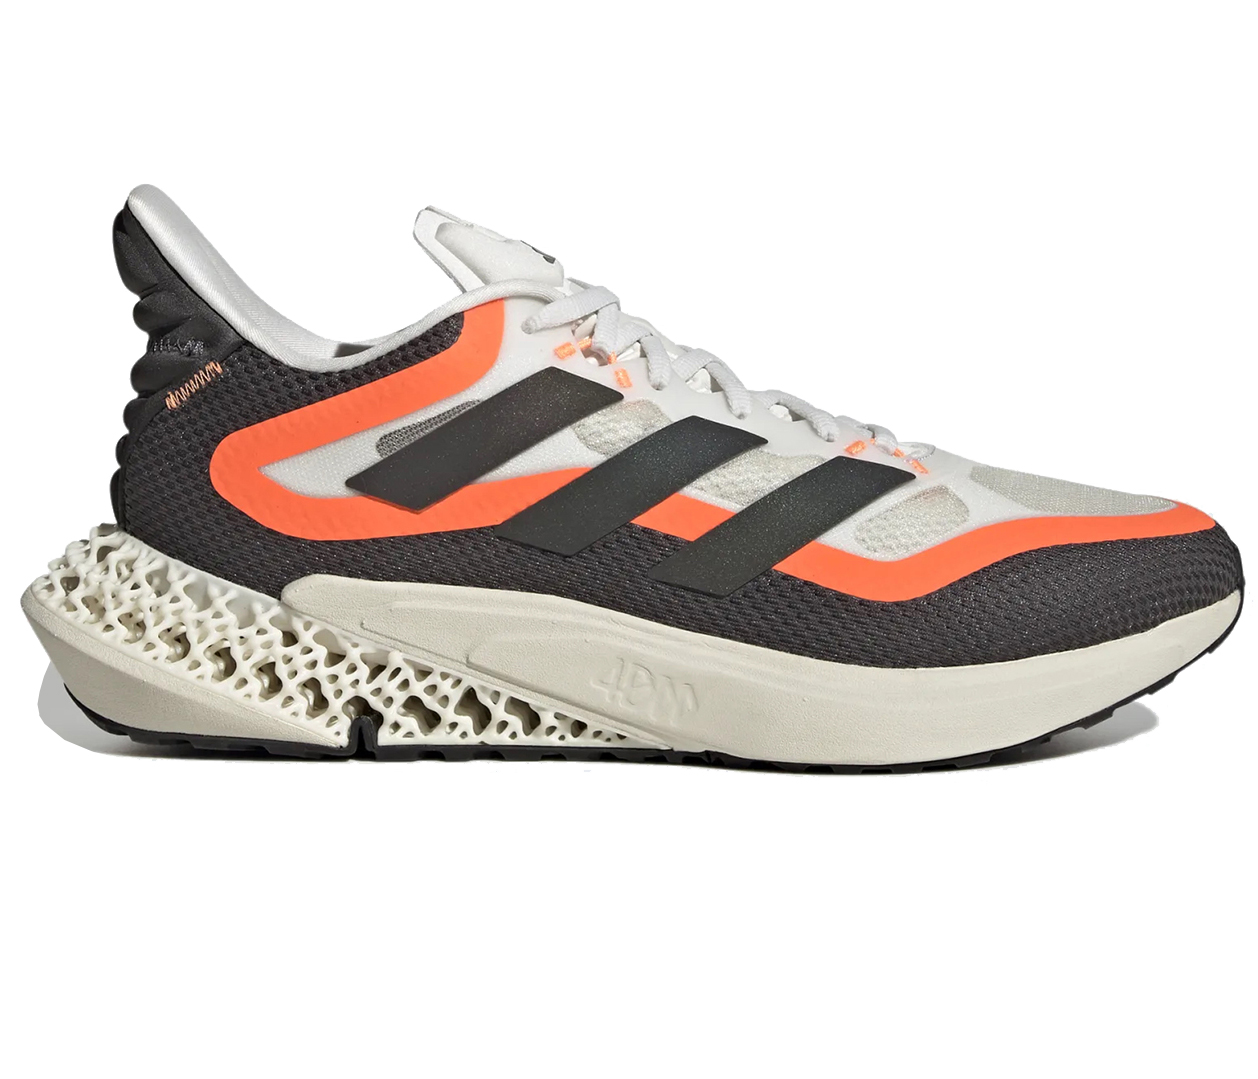 adidas 4dfwd pulse 2 running shoes